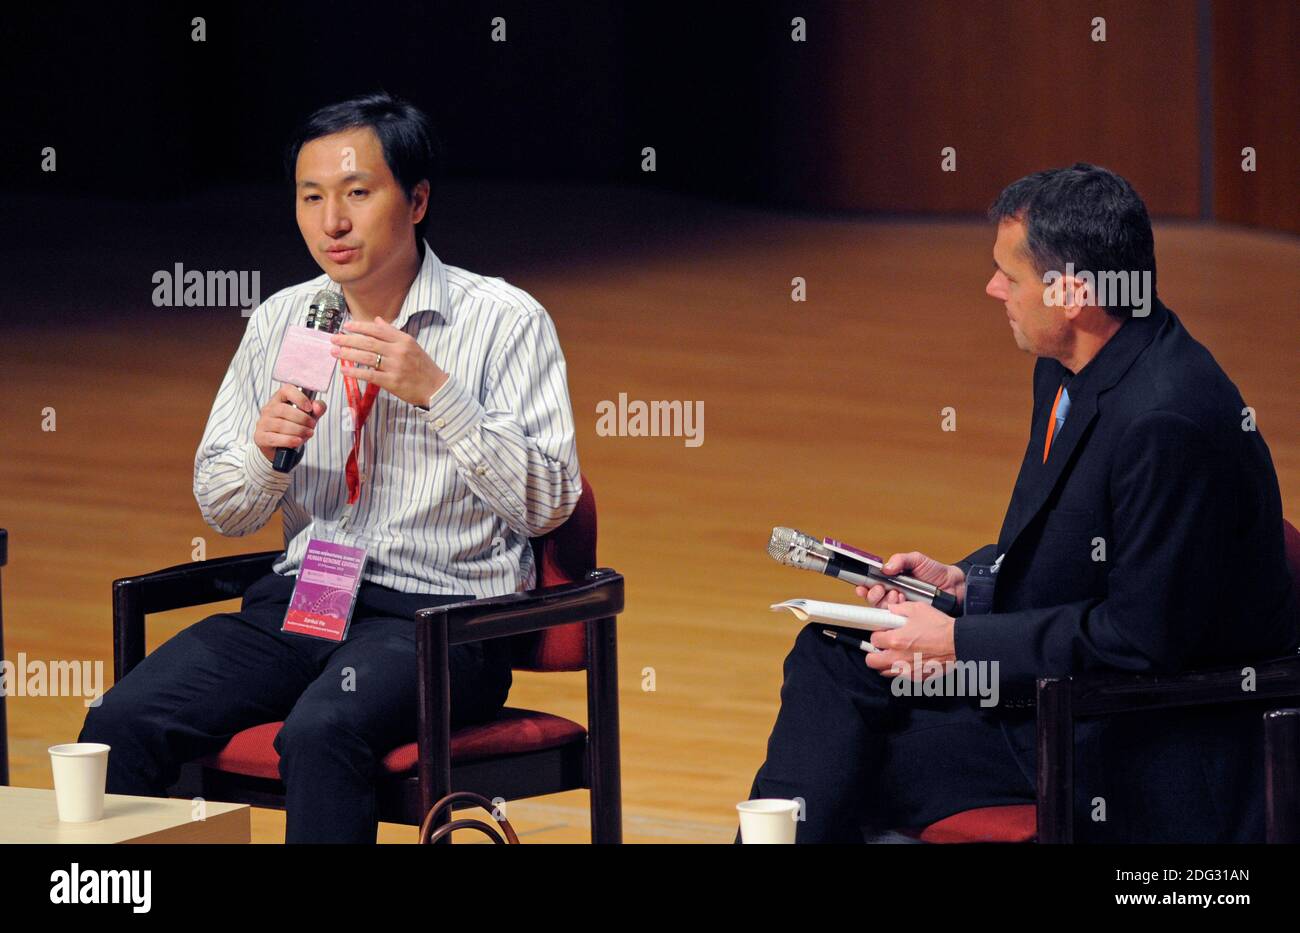 Chinese biologist He Jiankui gives a presentation at Hong Kong University during the Second International Summit on Humane Genome Editing. He had biologically altered the genome of two twins in an attempt to make them resistant to AIDS, which their biological father had. He was condemned by the scientific community, and was taken into custody immediately after his talk and was eventually jailed. At right is Matthew Porteus of Stanford University. Stock Photo